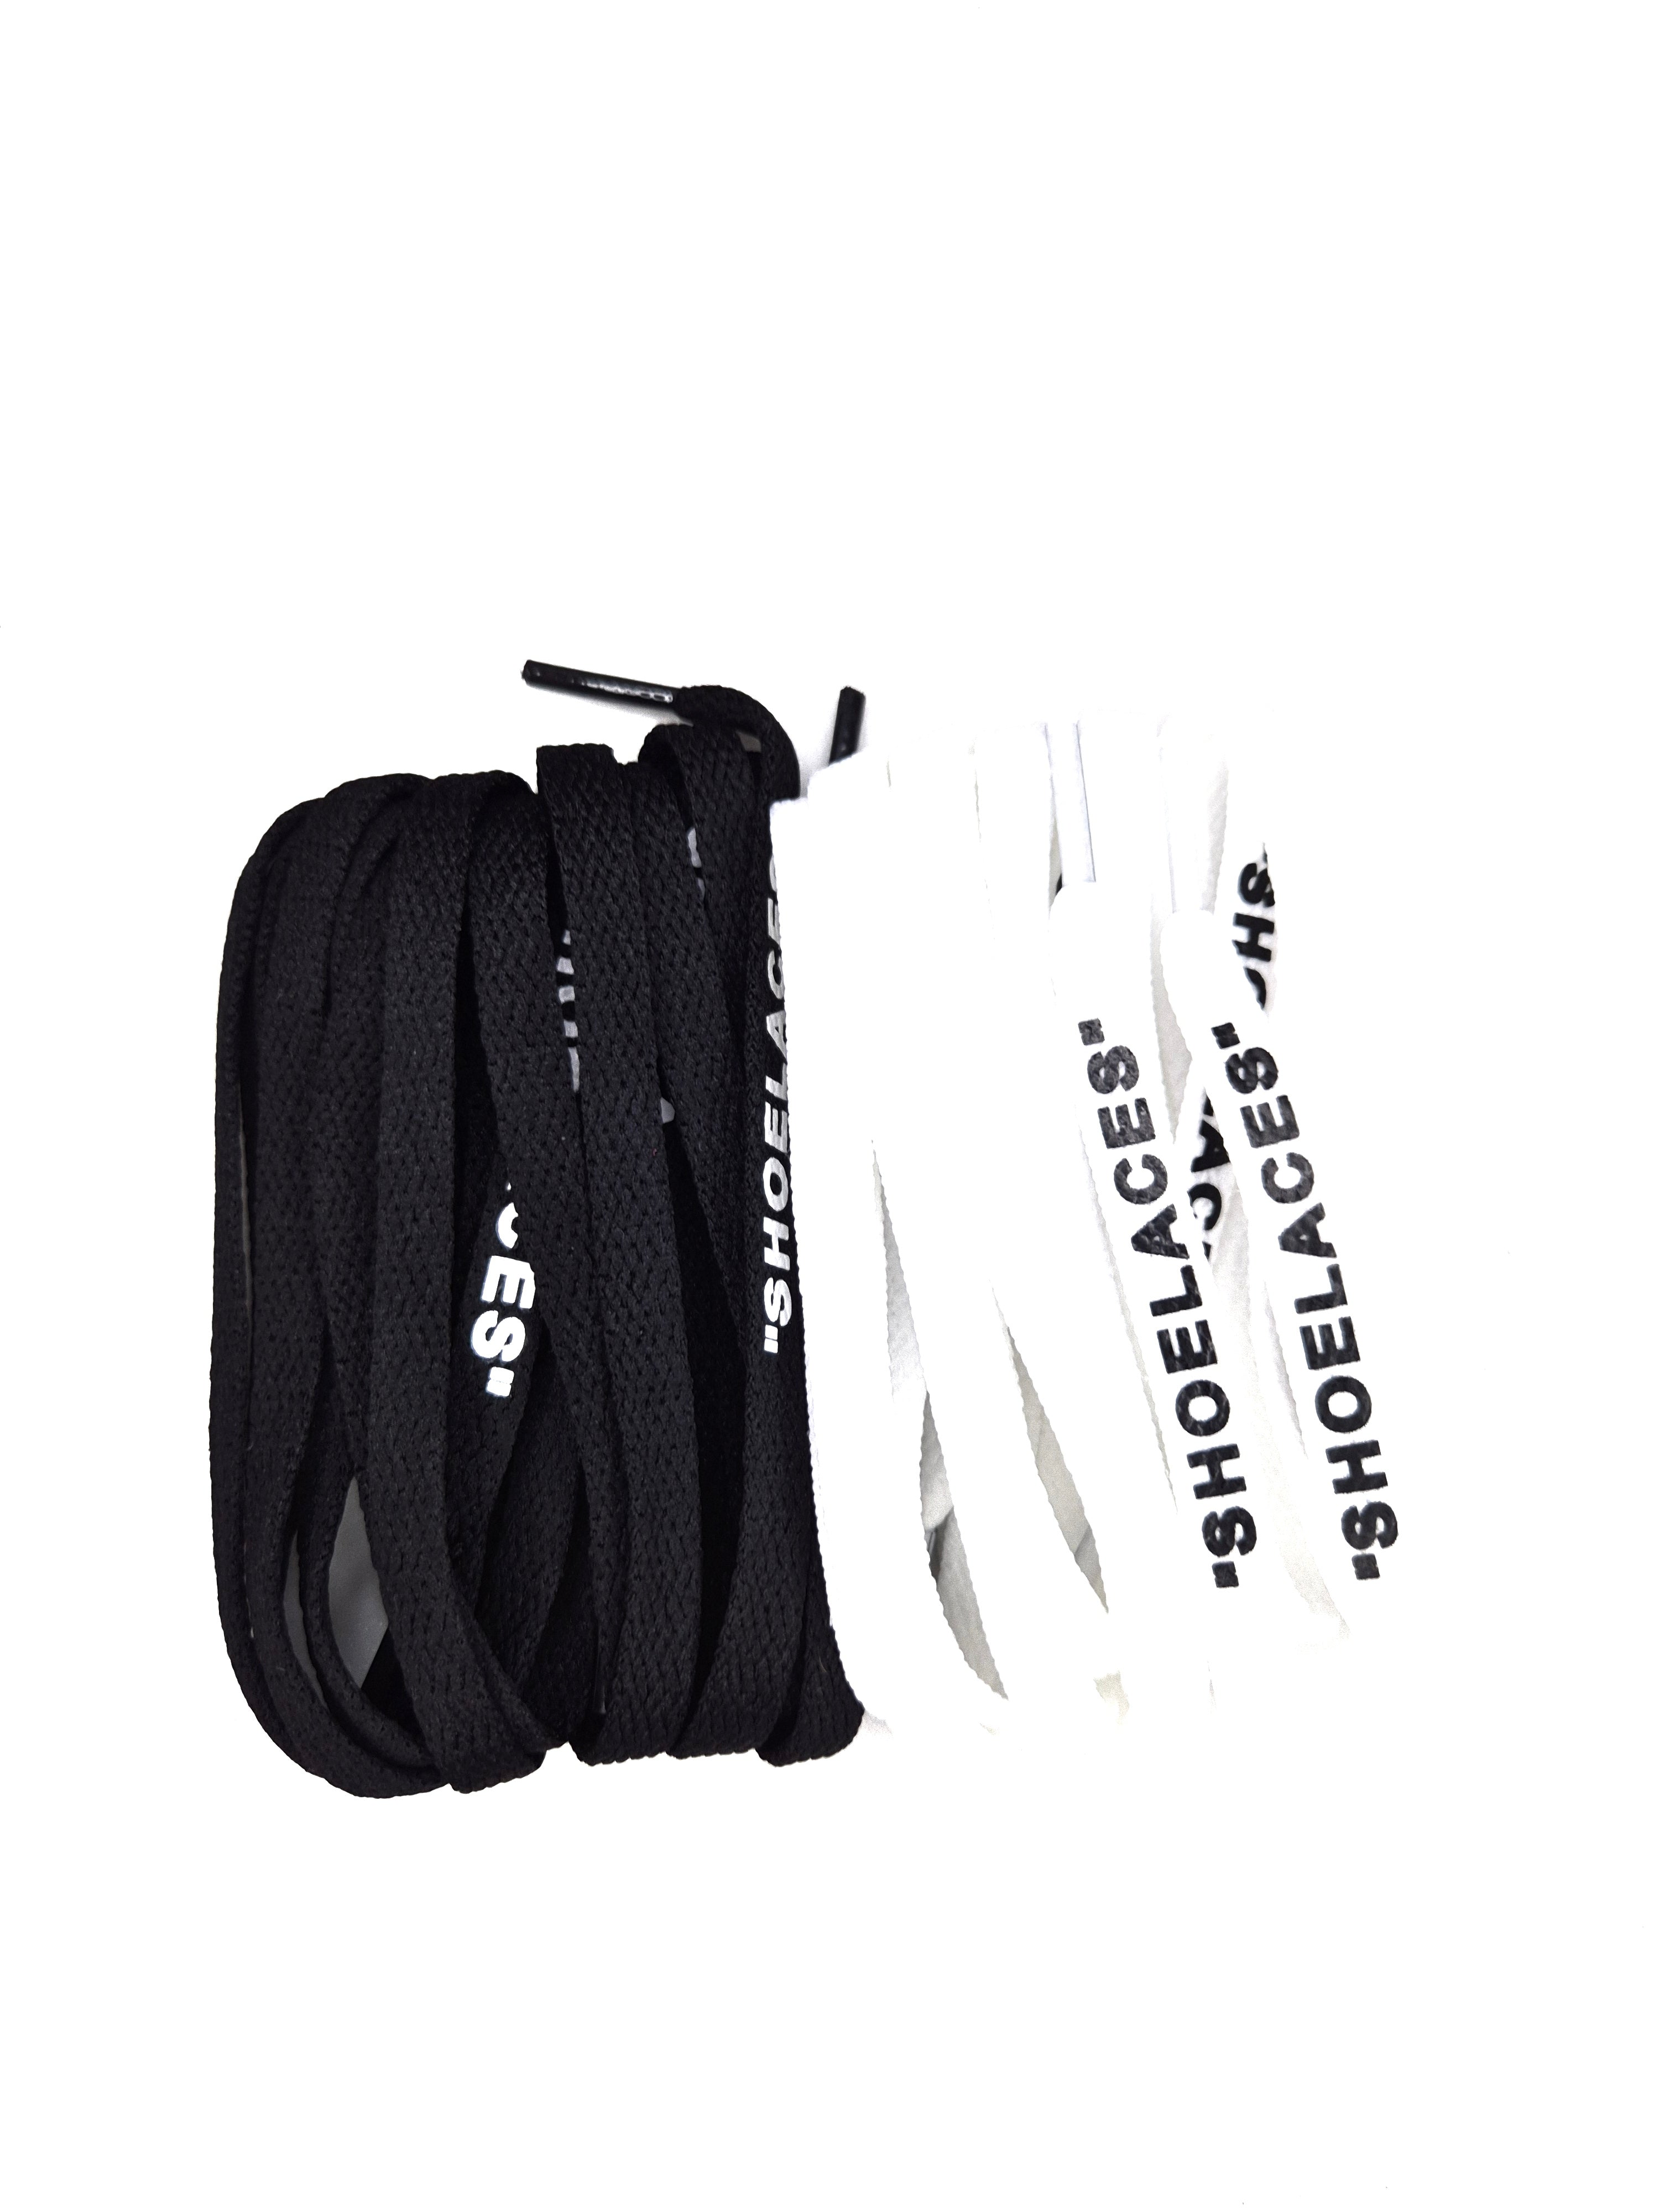 THE GOODLACE OFF WHITE STYLE "SHOELACES" 2 PAIR COMBO